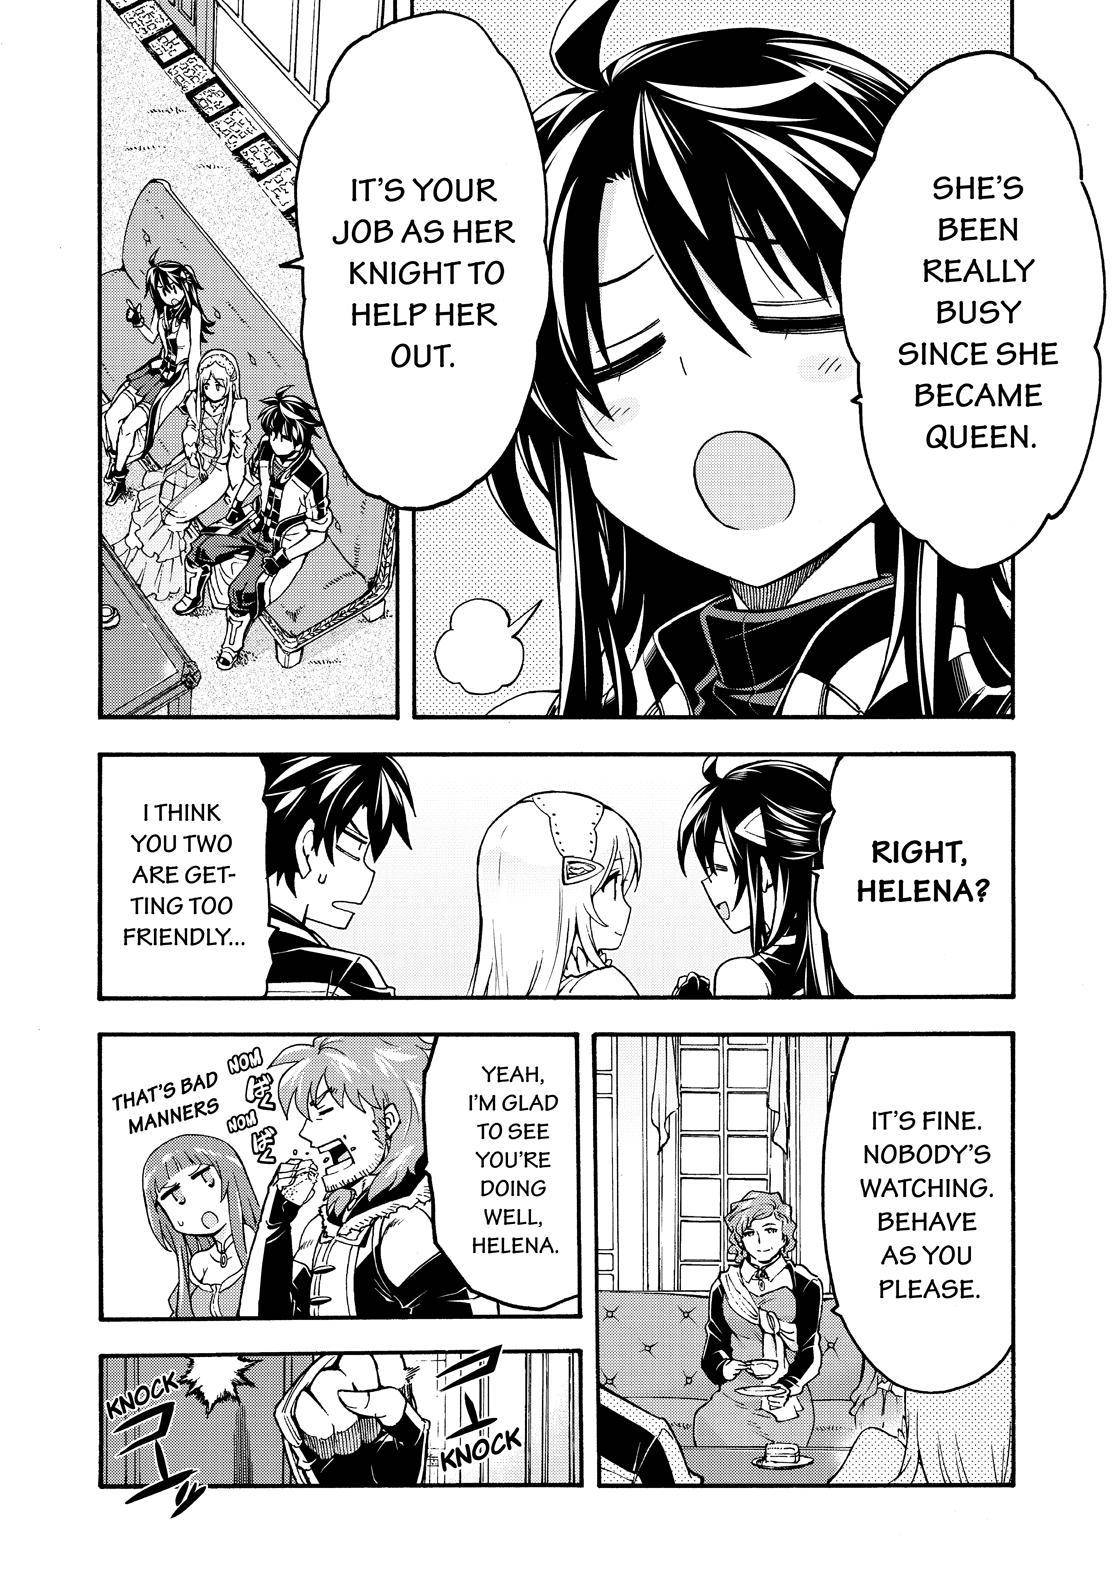 Knights and Magic Chapter 82